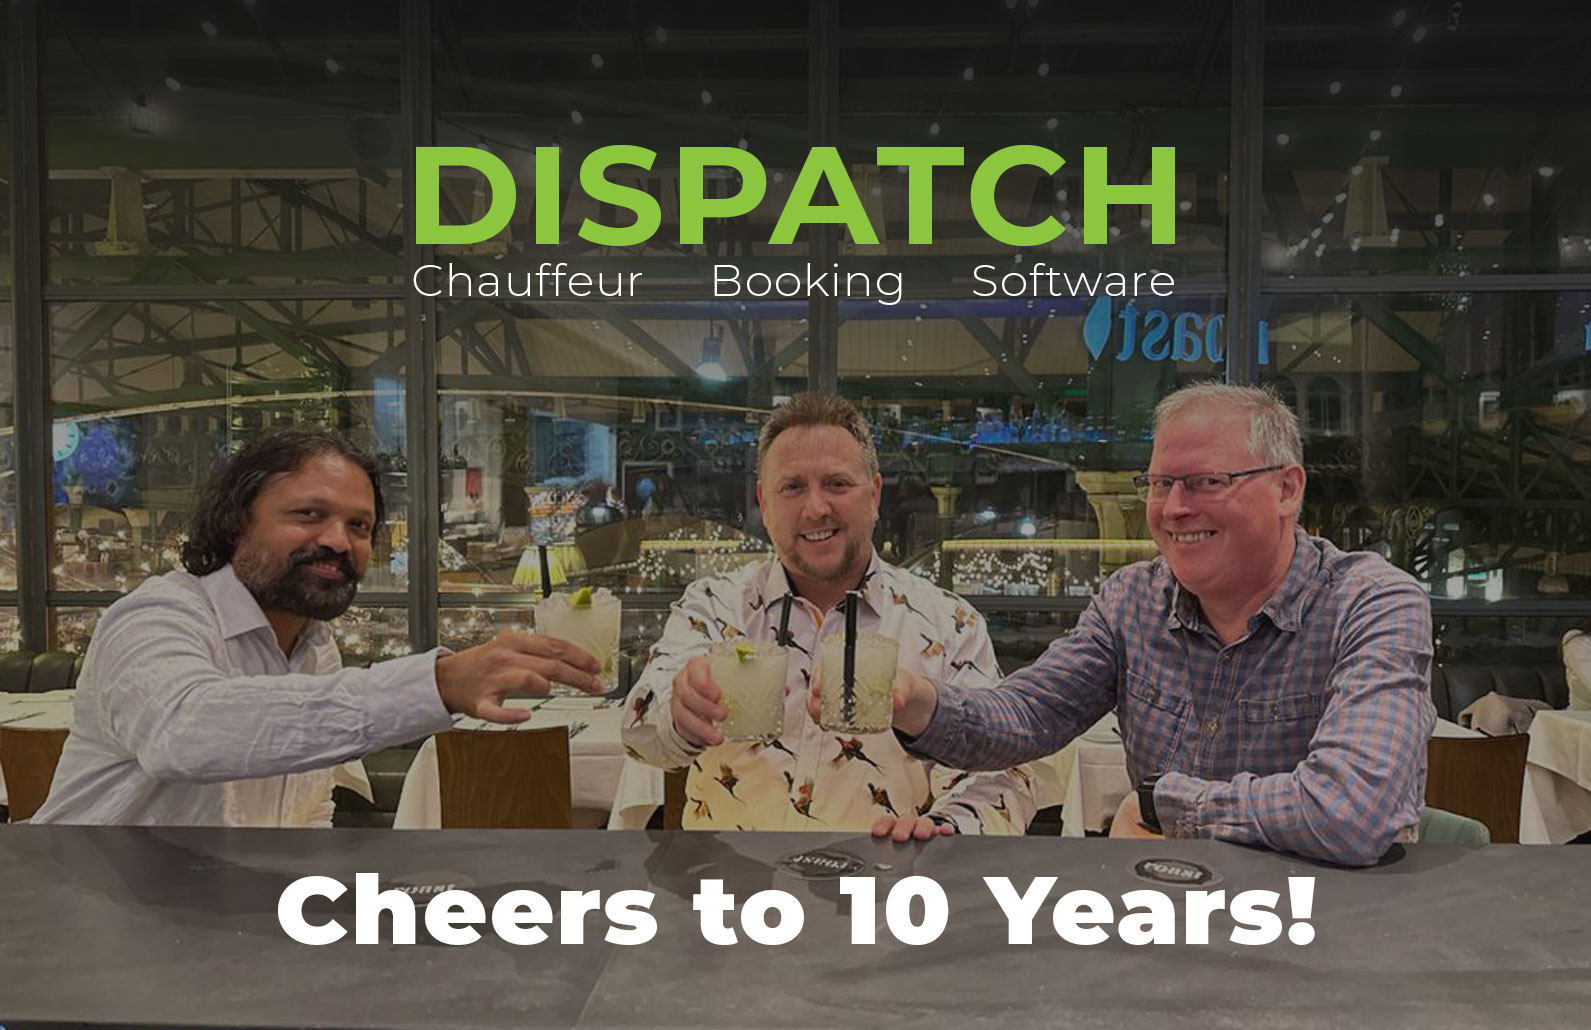 DISPATCH Chauffeur Booking Software – Cheers to 10 Years!